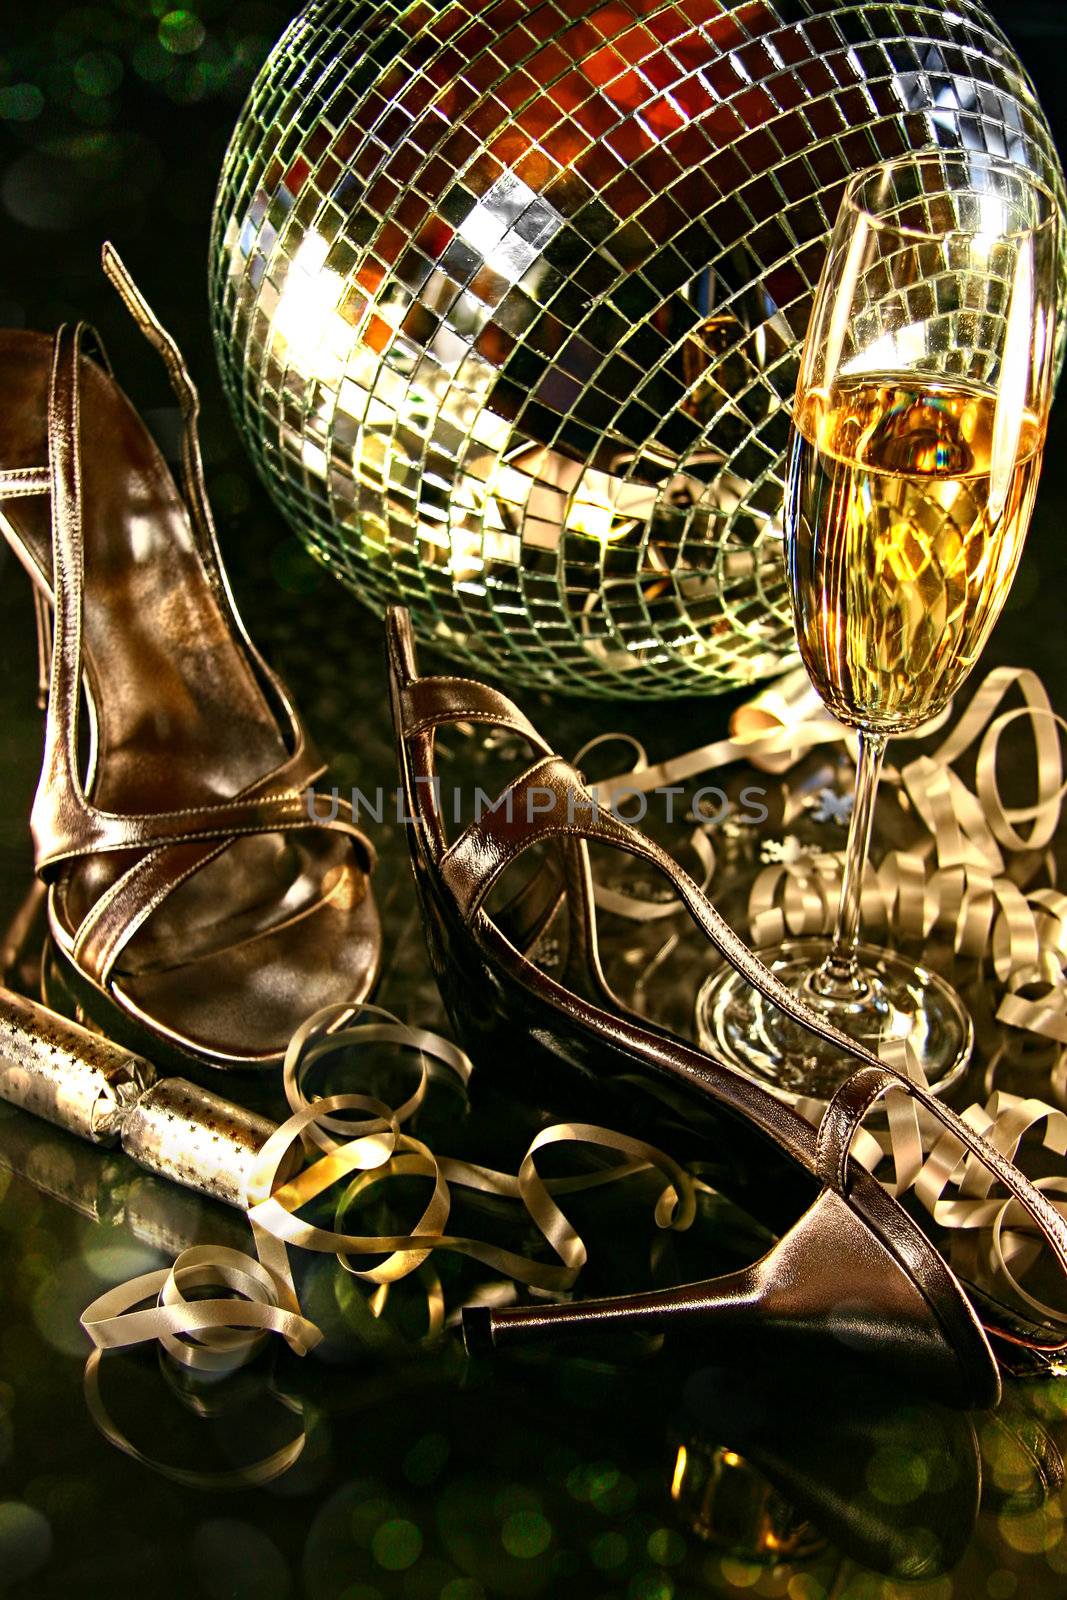 Silver party shoes on floor with champagne glass for New Year's Eve